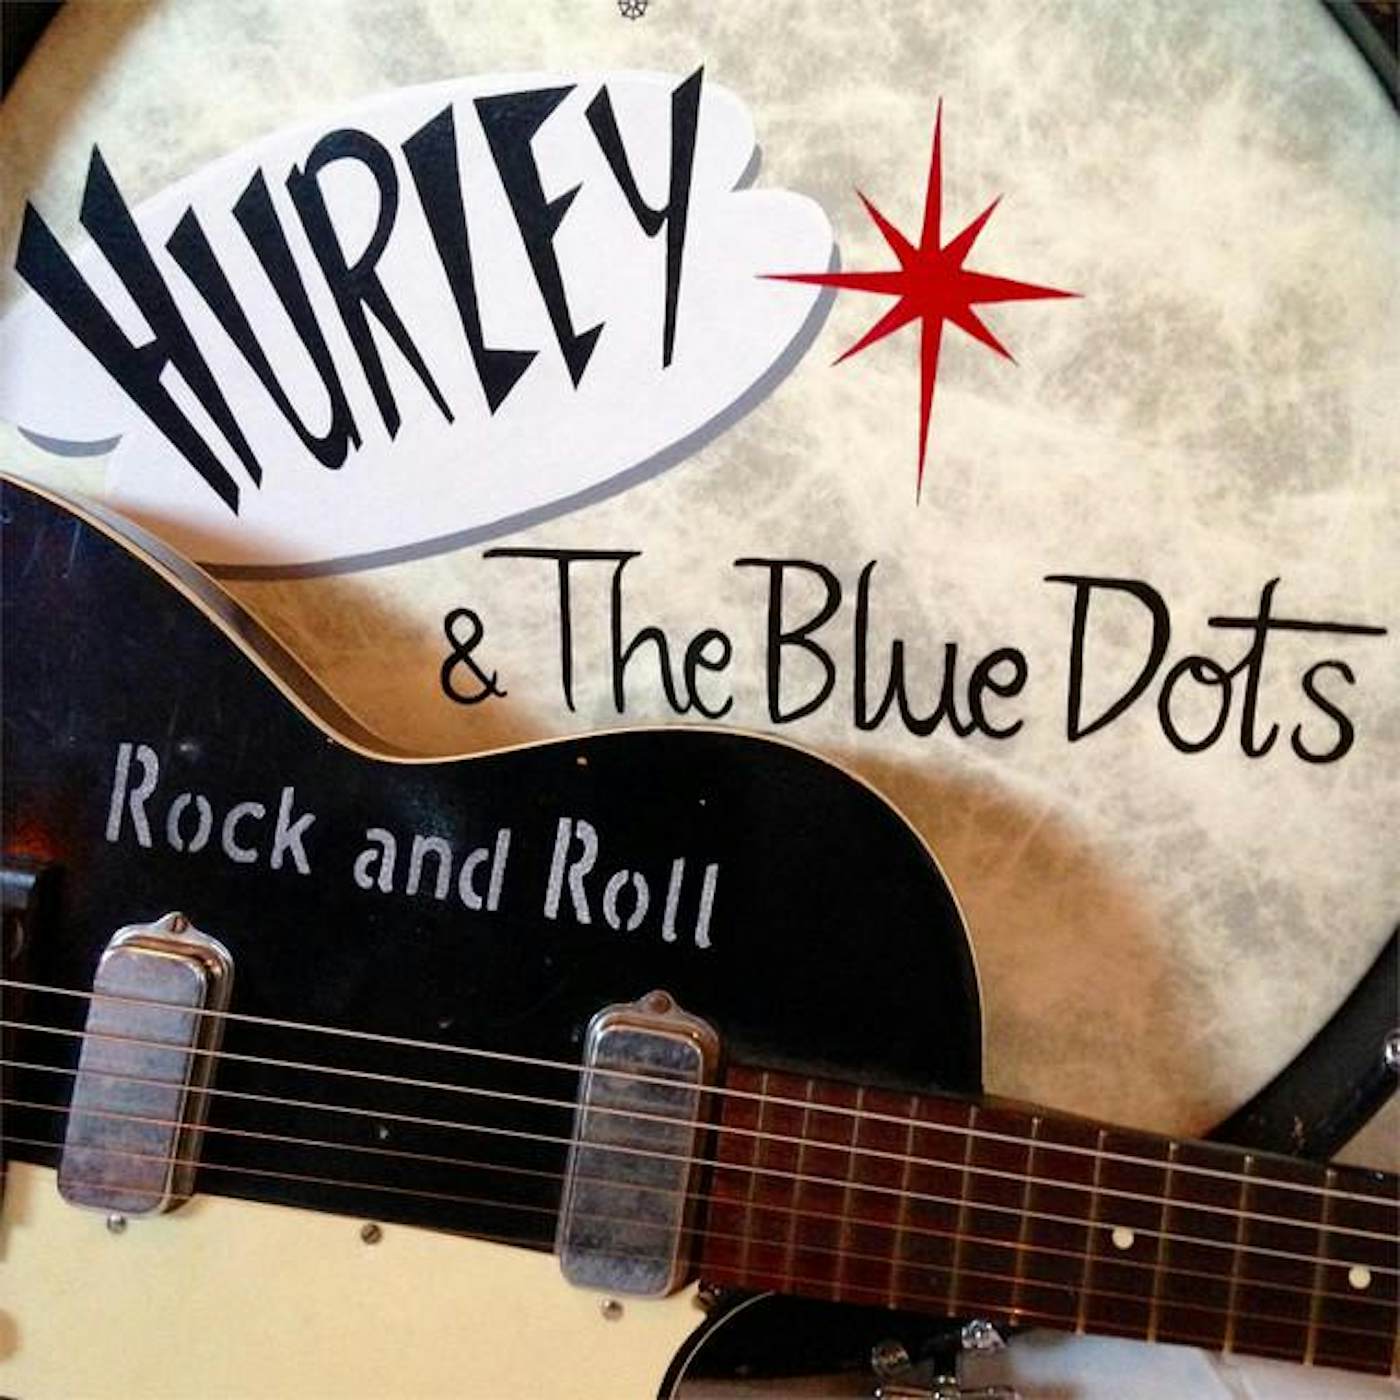 Hurley & The Blue Dots